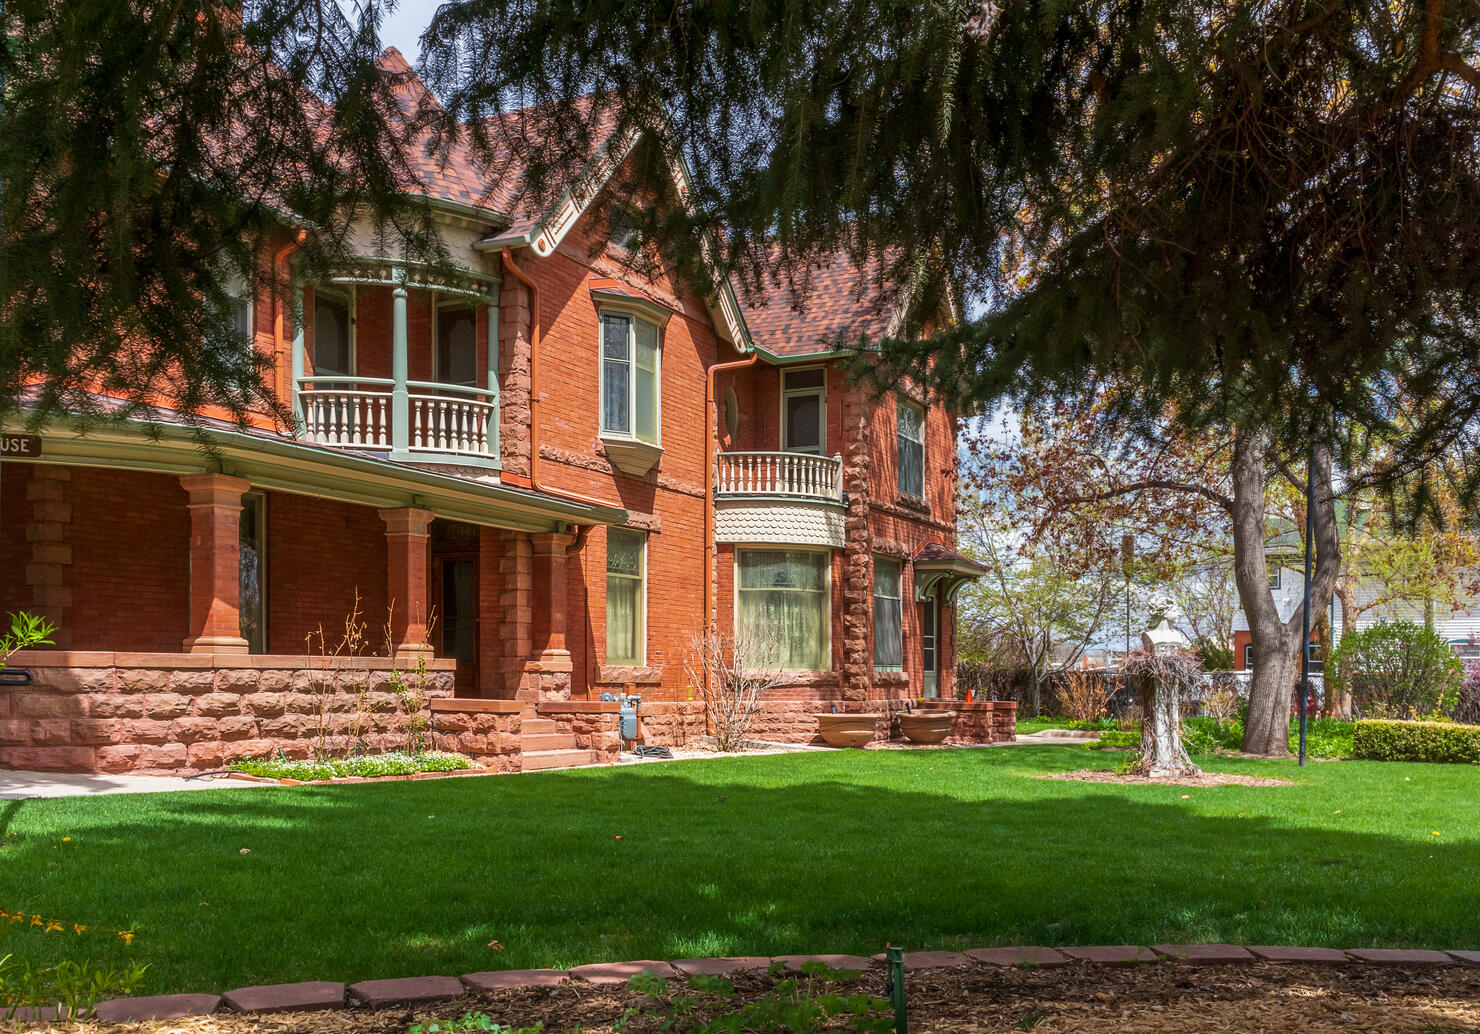 Longmont, Colorado - May 8, 2021: Callahan House - 1892 Queen Anne-style house, a popular event venue, with ornate woodwork and an Italianate garden in Longmont, Colorado